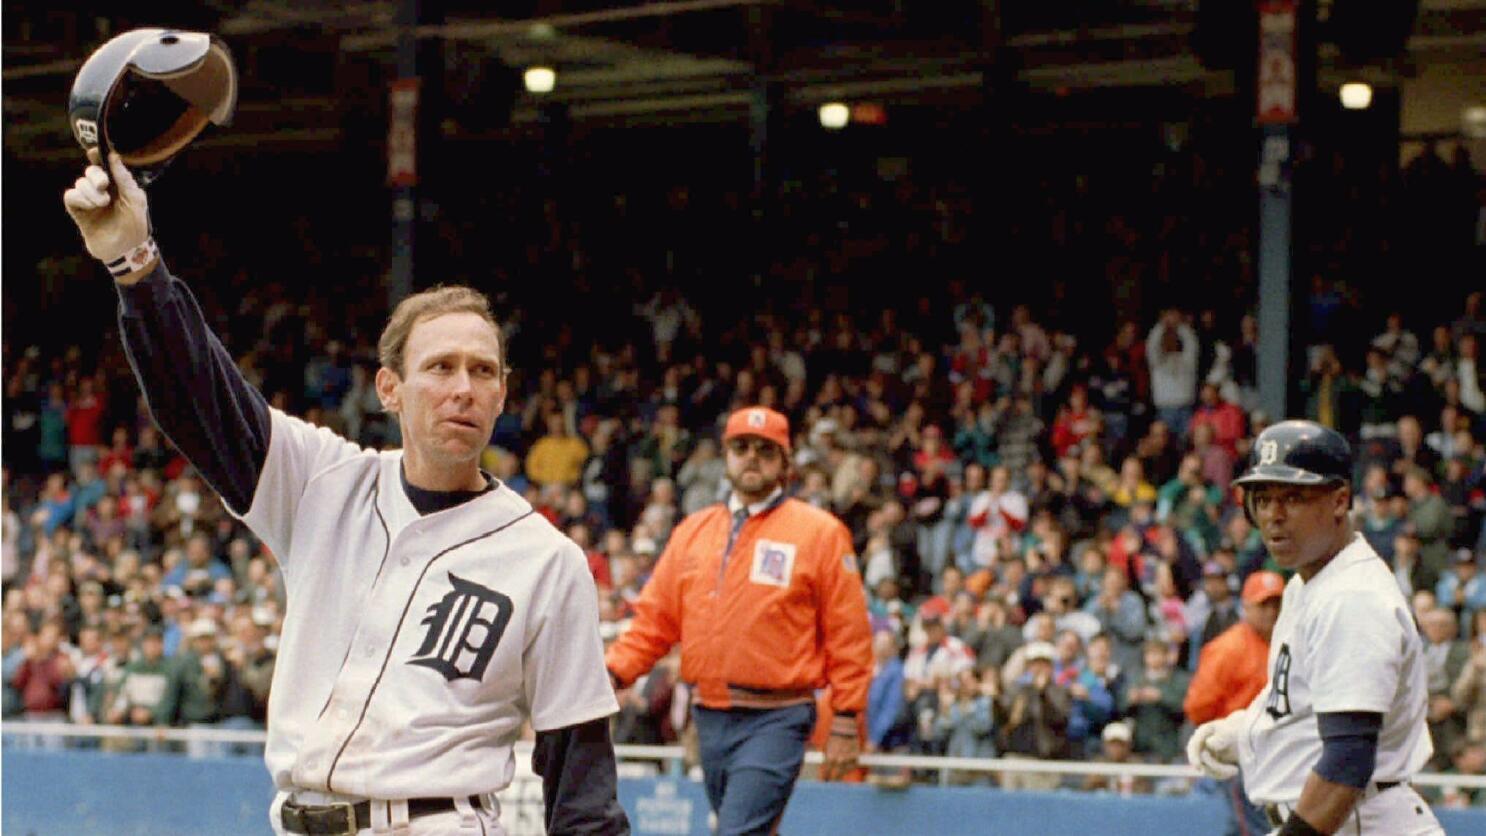 Jack Morris, Alan Trammell elected to Hall of Fame